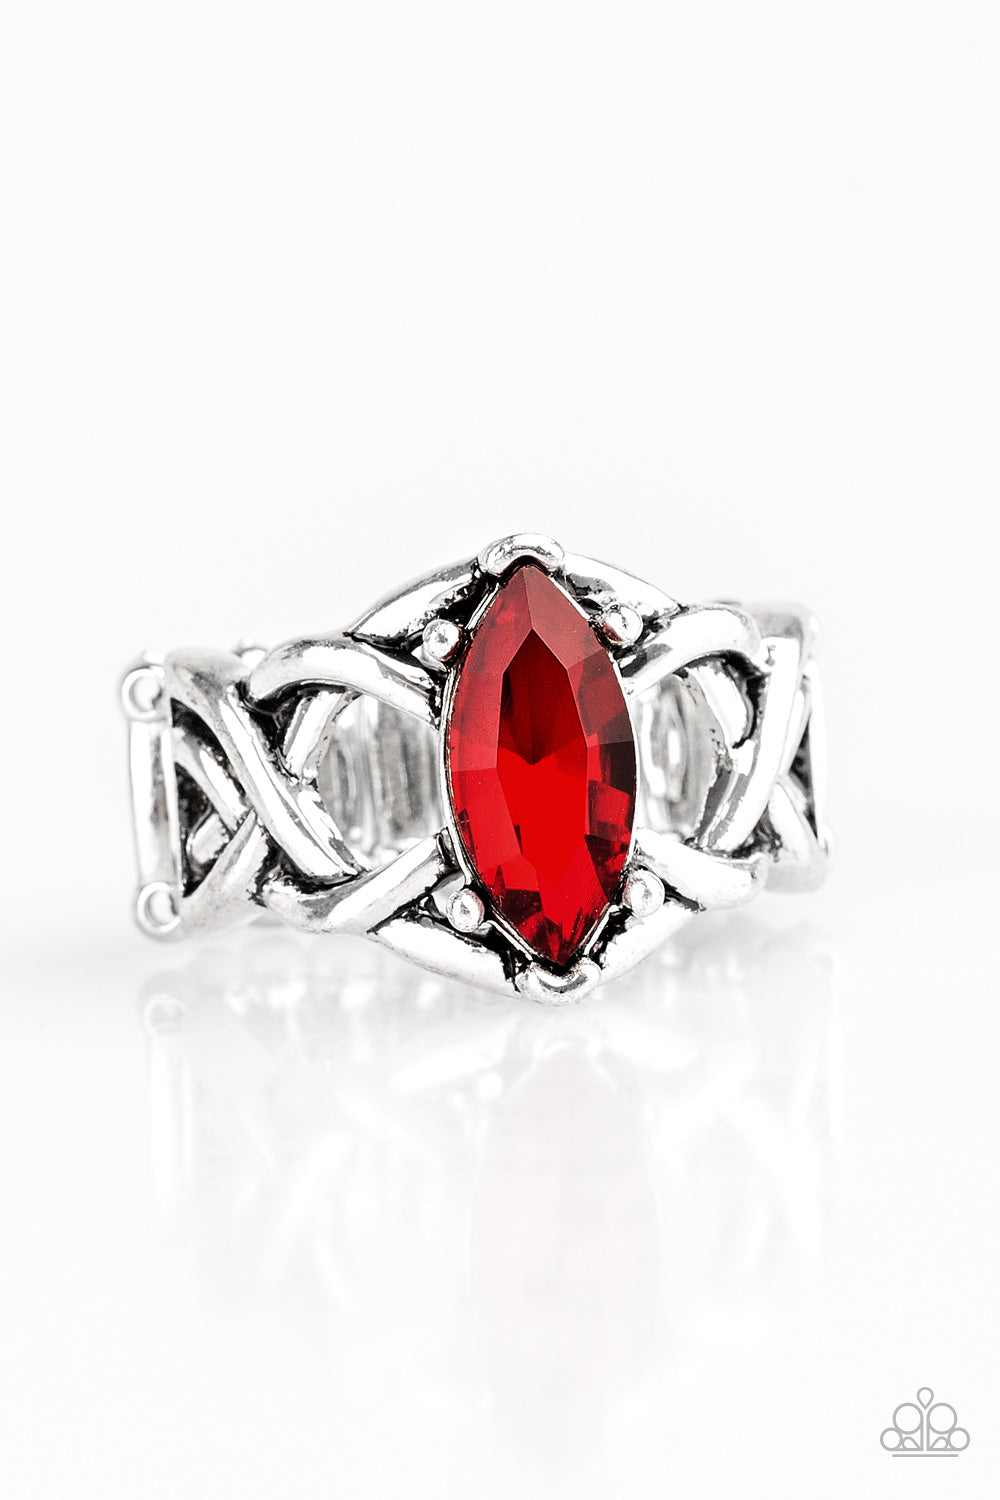 PRINCESS PRIMA DONNA - RED MARQUISE RUBY RHINESTONE SOLITAIRE CELTIC KNOTS RING